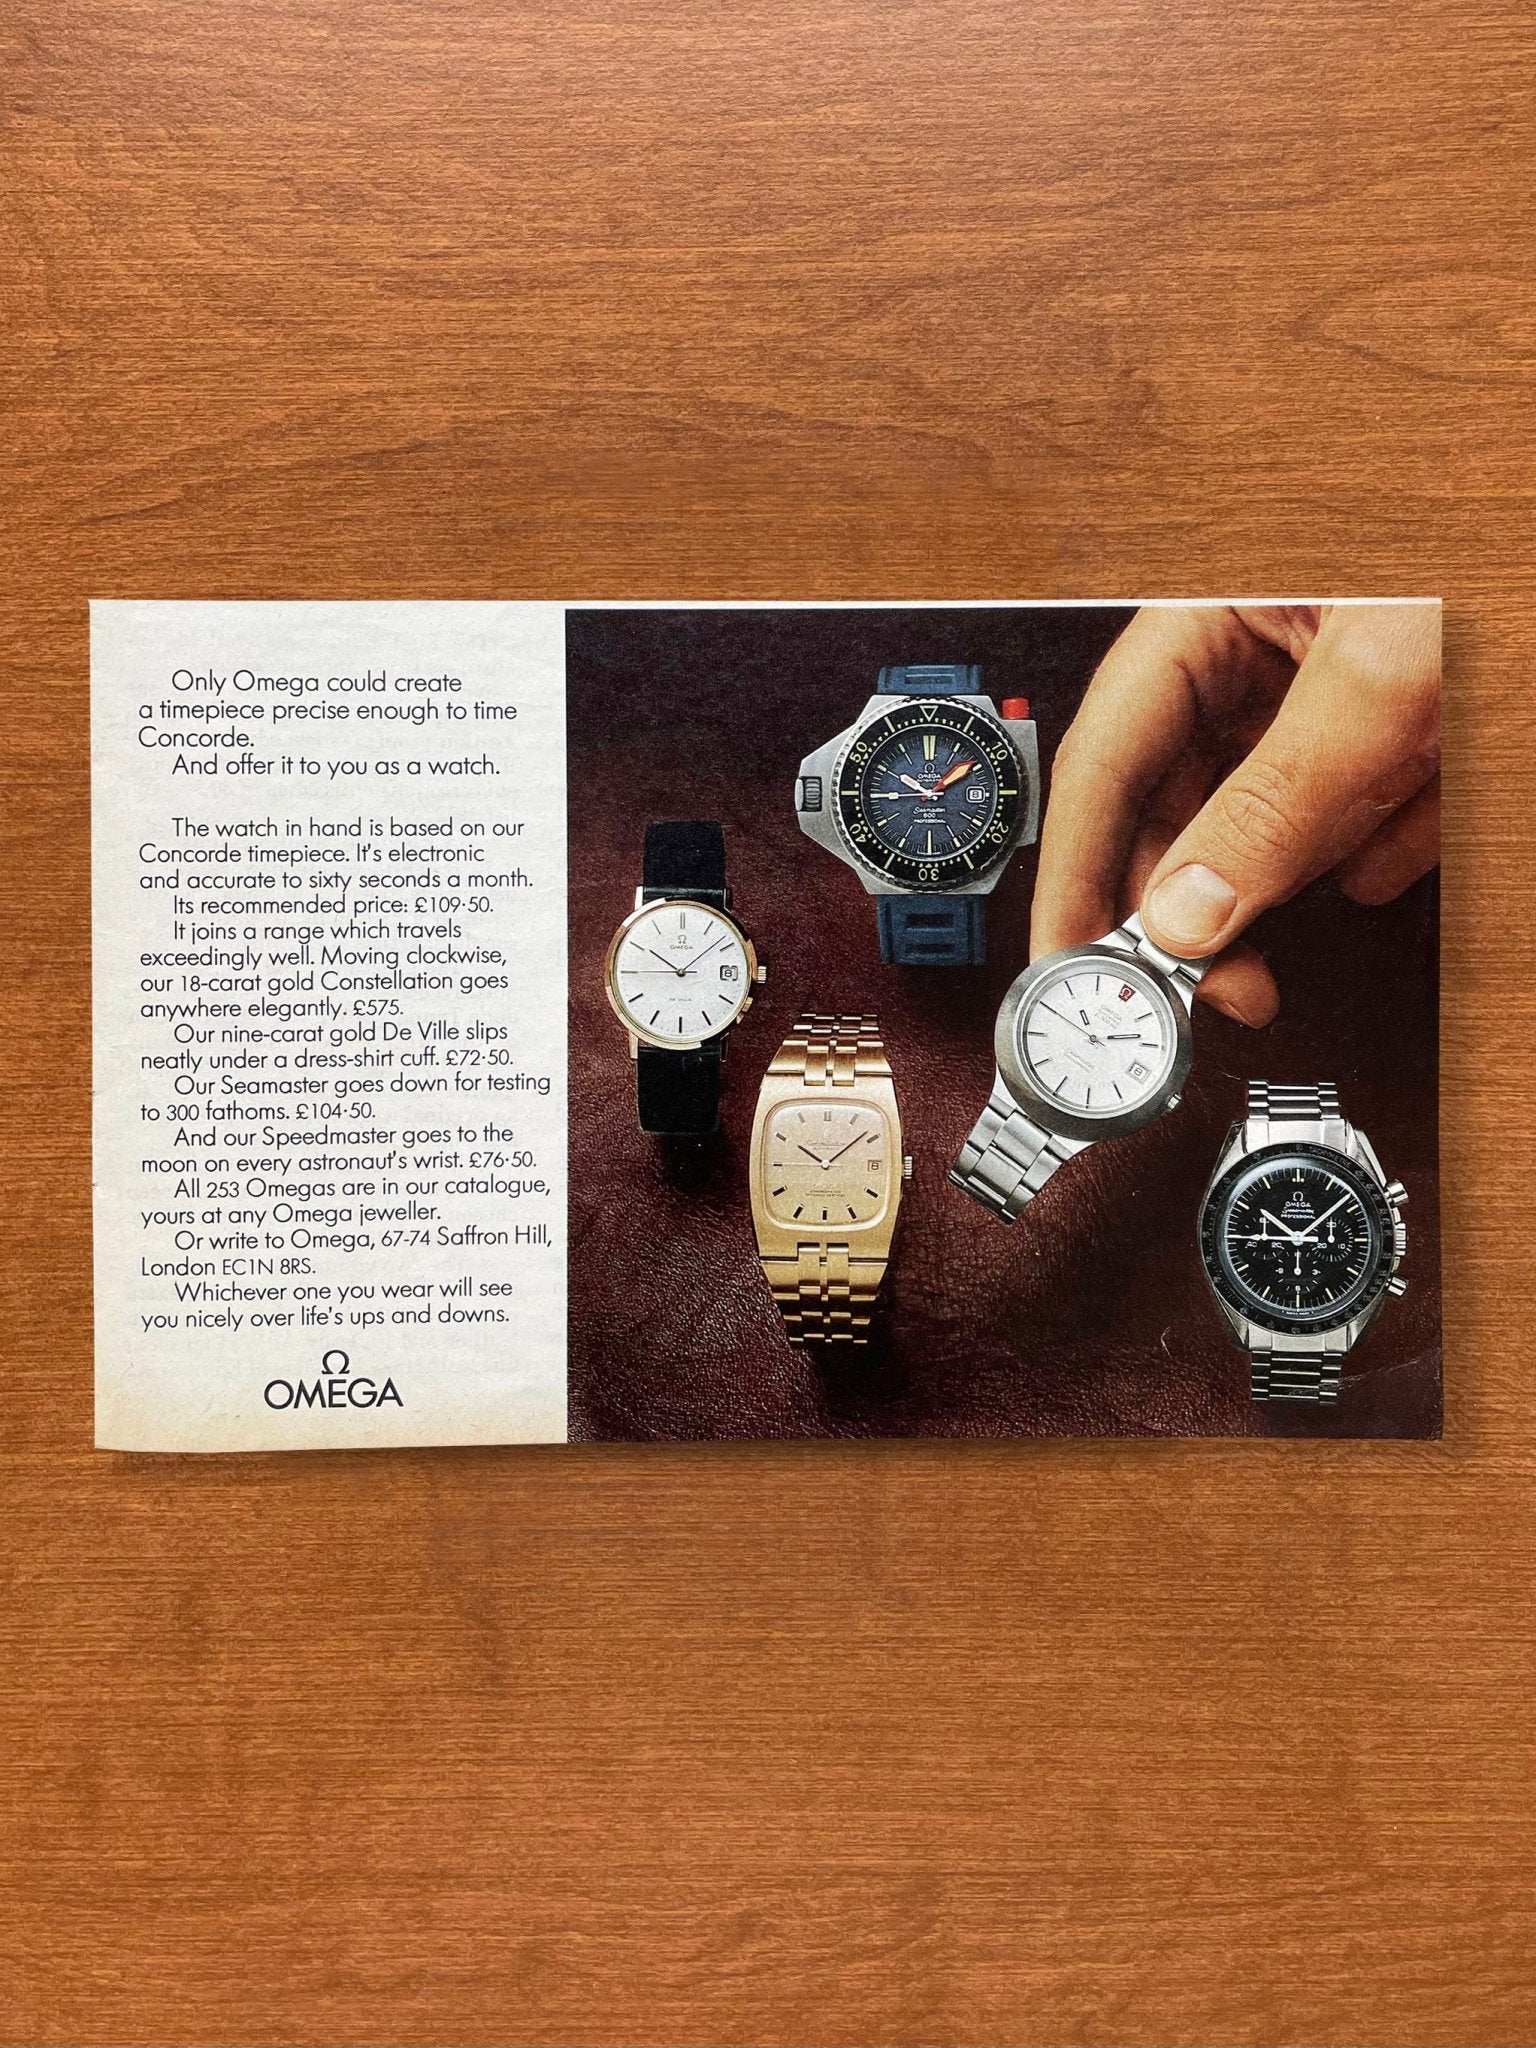 Omega Watches including Seamaster 600 and Speedmaster Advertisement